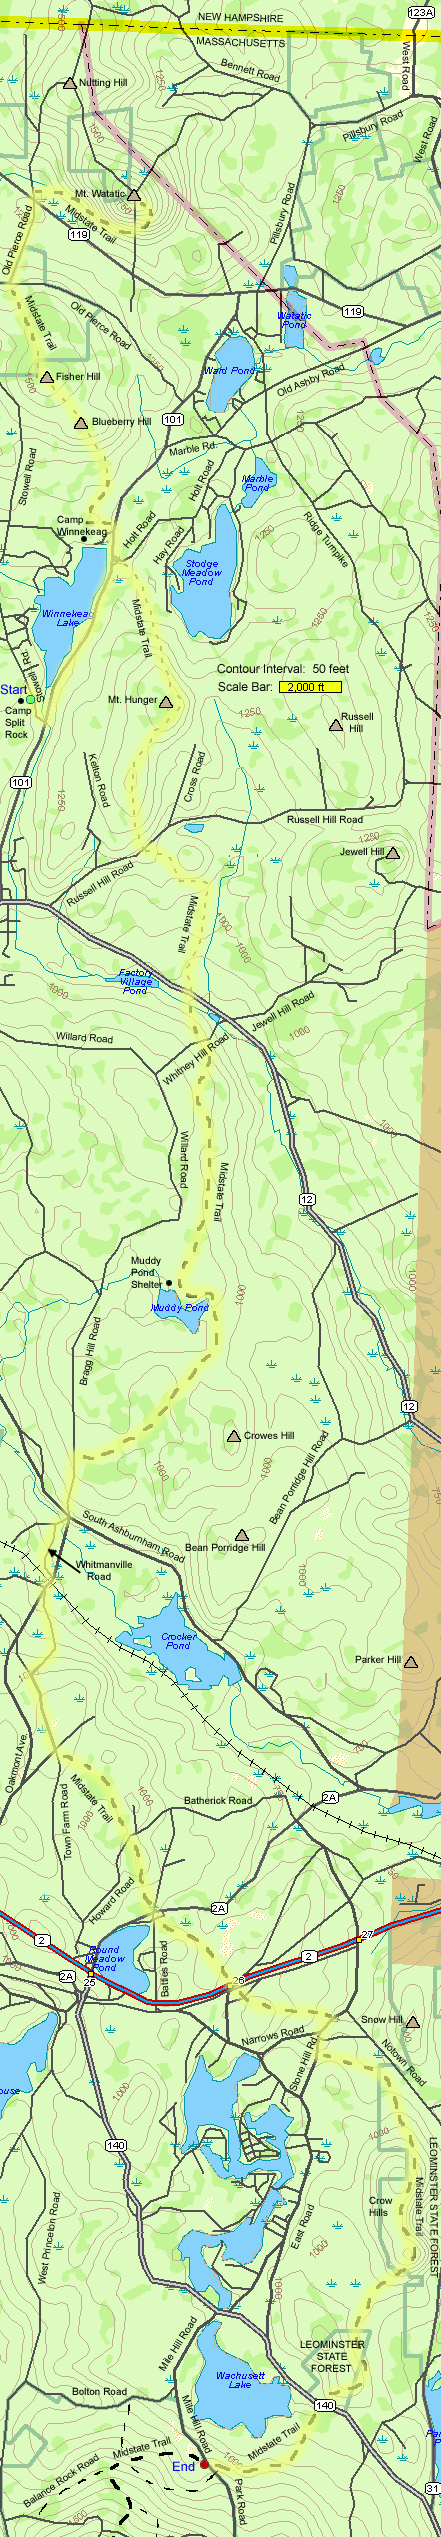 Map of hike route on the Midstate Trail from Mt. Watatic to Wachusett Mtn. (map by Webmaster)